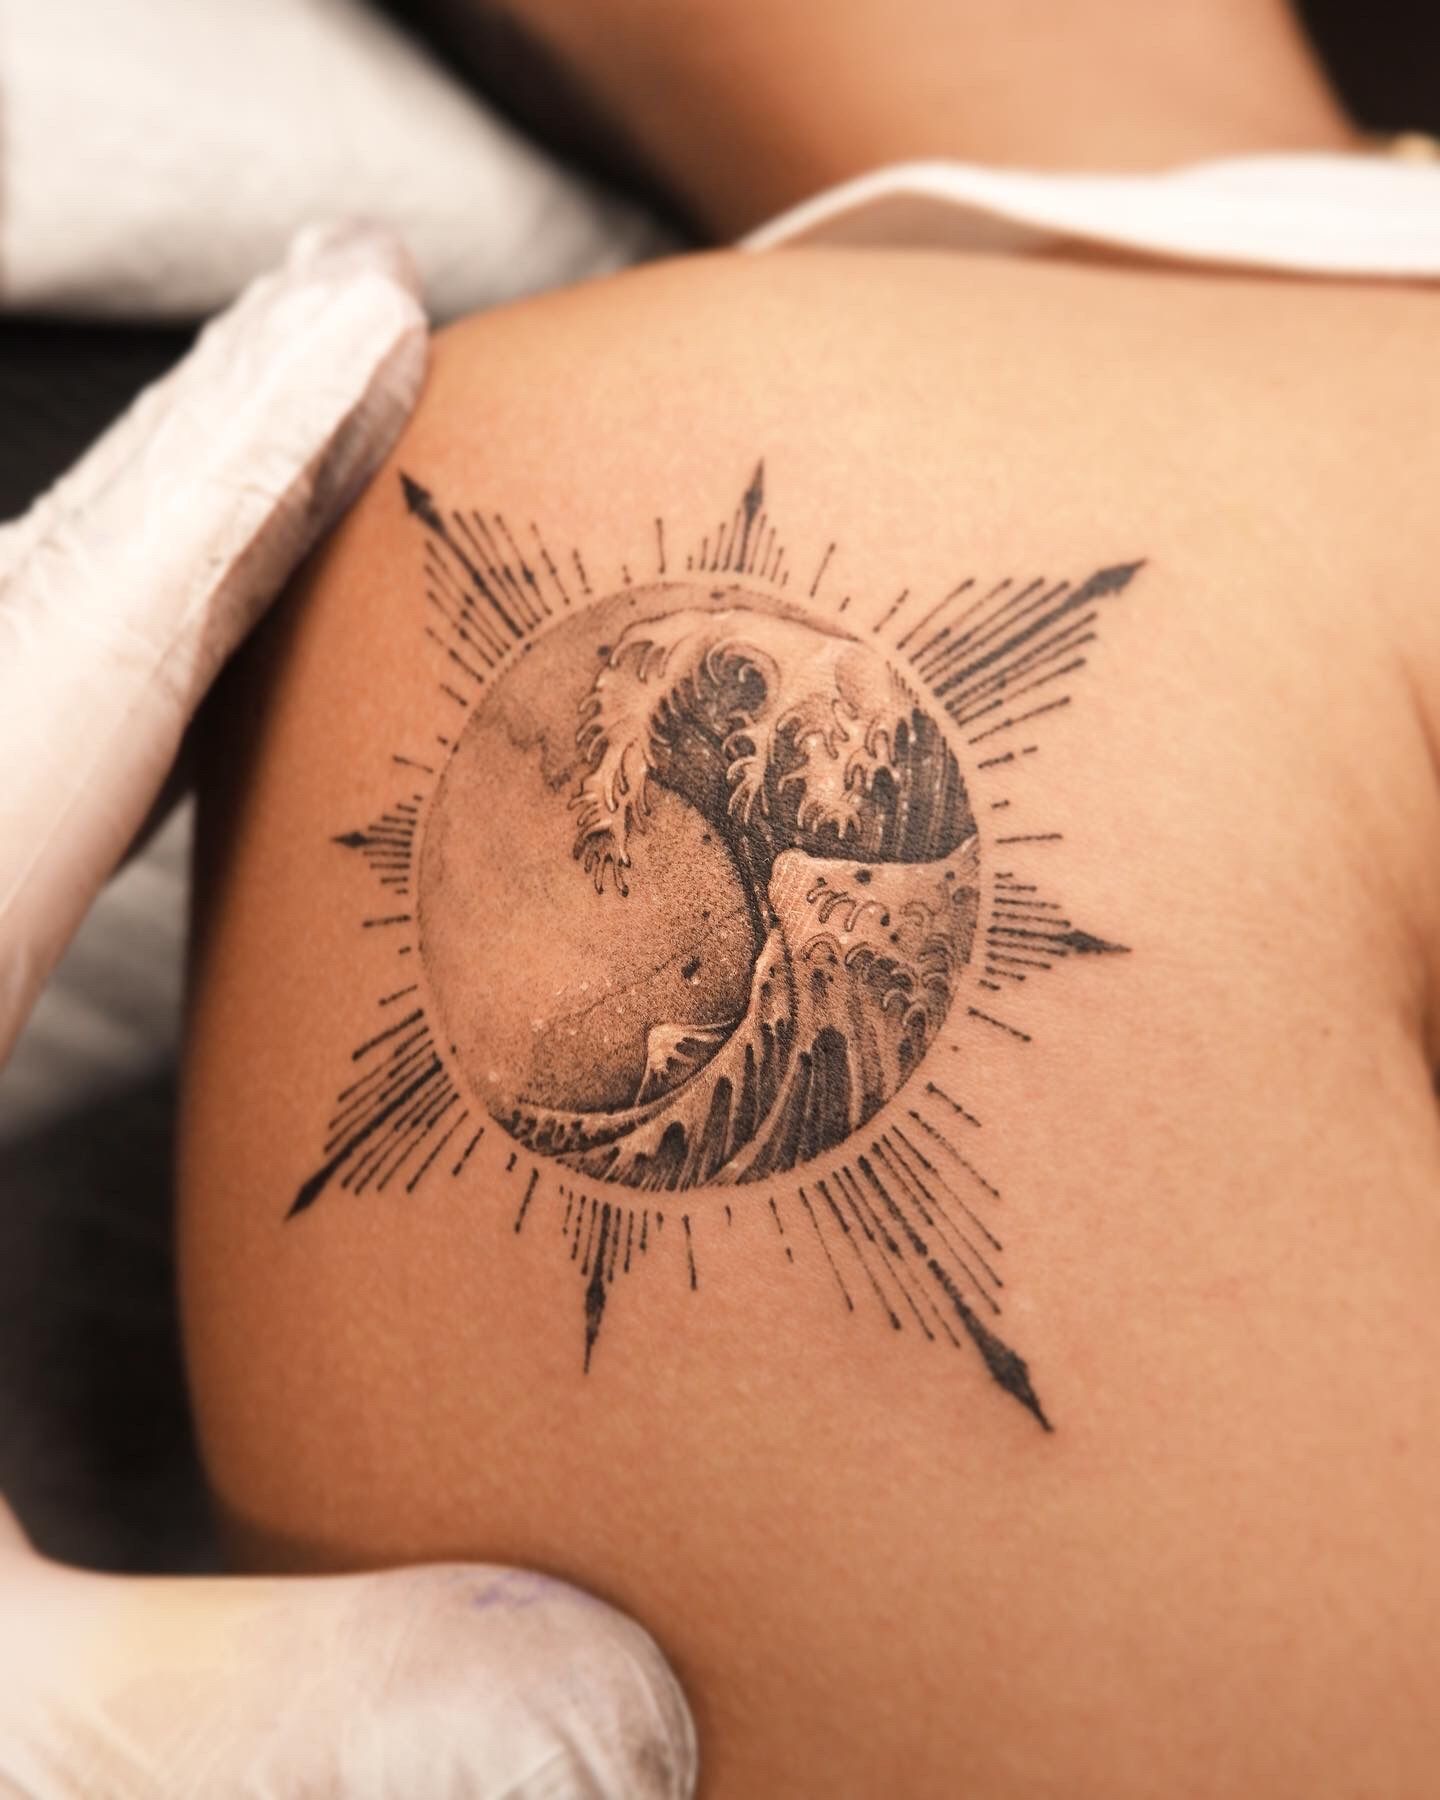 101 Amazing Sun Tattoo Ideas That Will Blow Your Mind! | Tattoo ideen  klein, Ideen für tattoos, Tattoo ideen